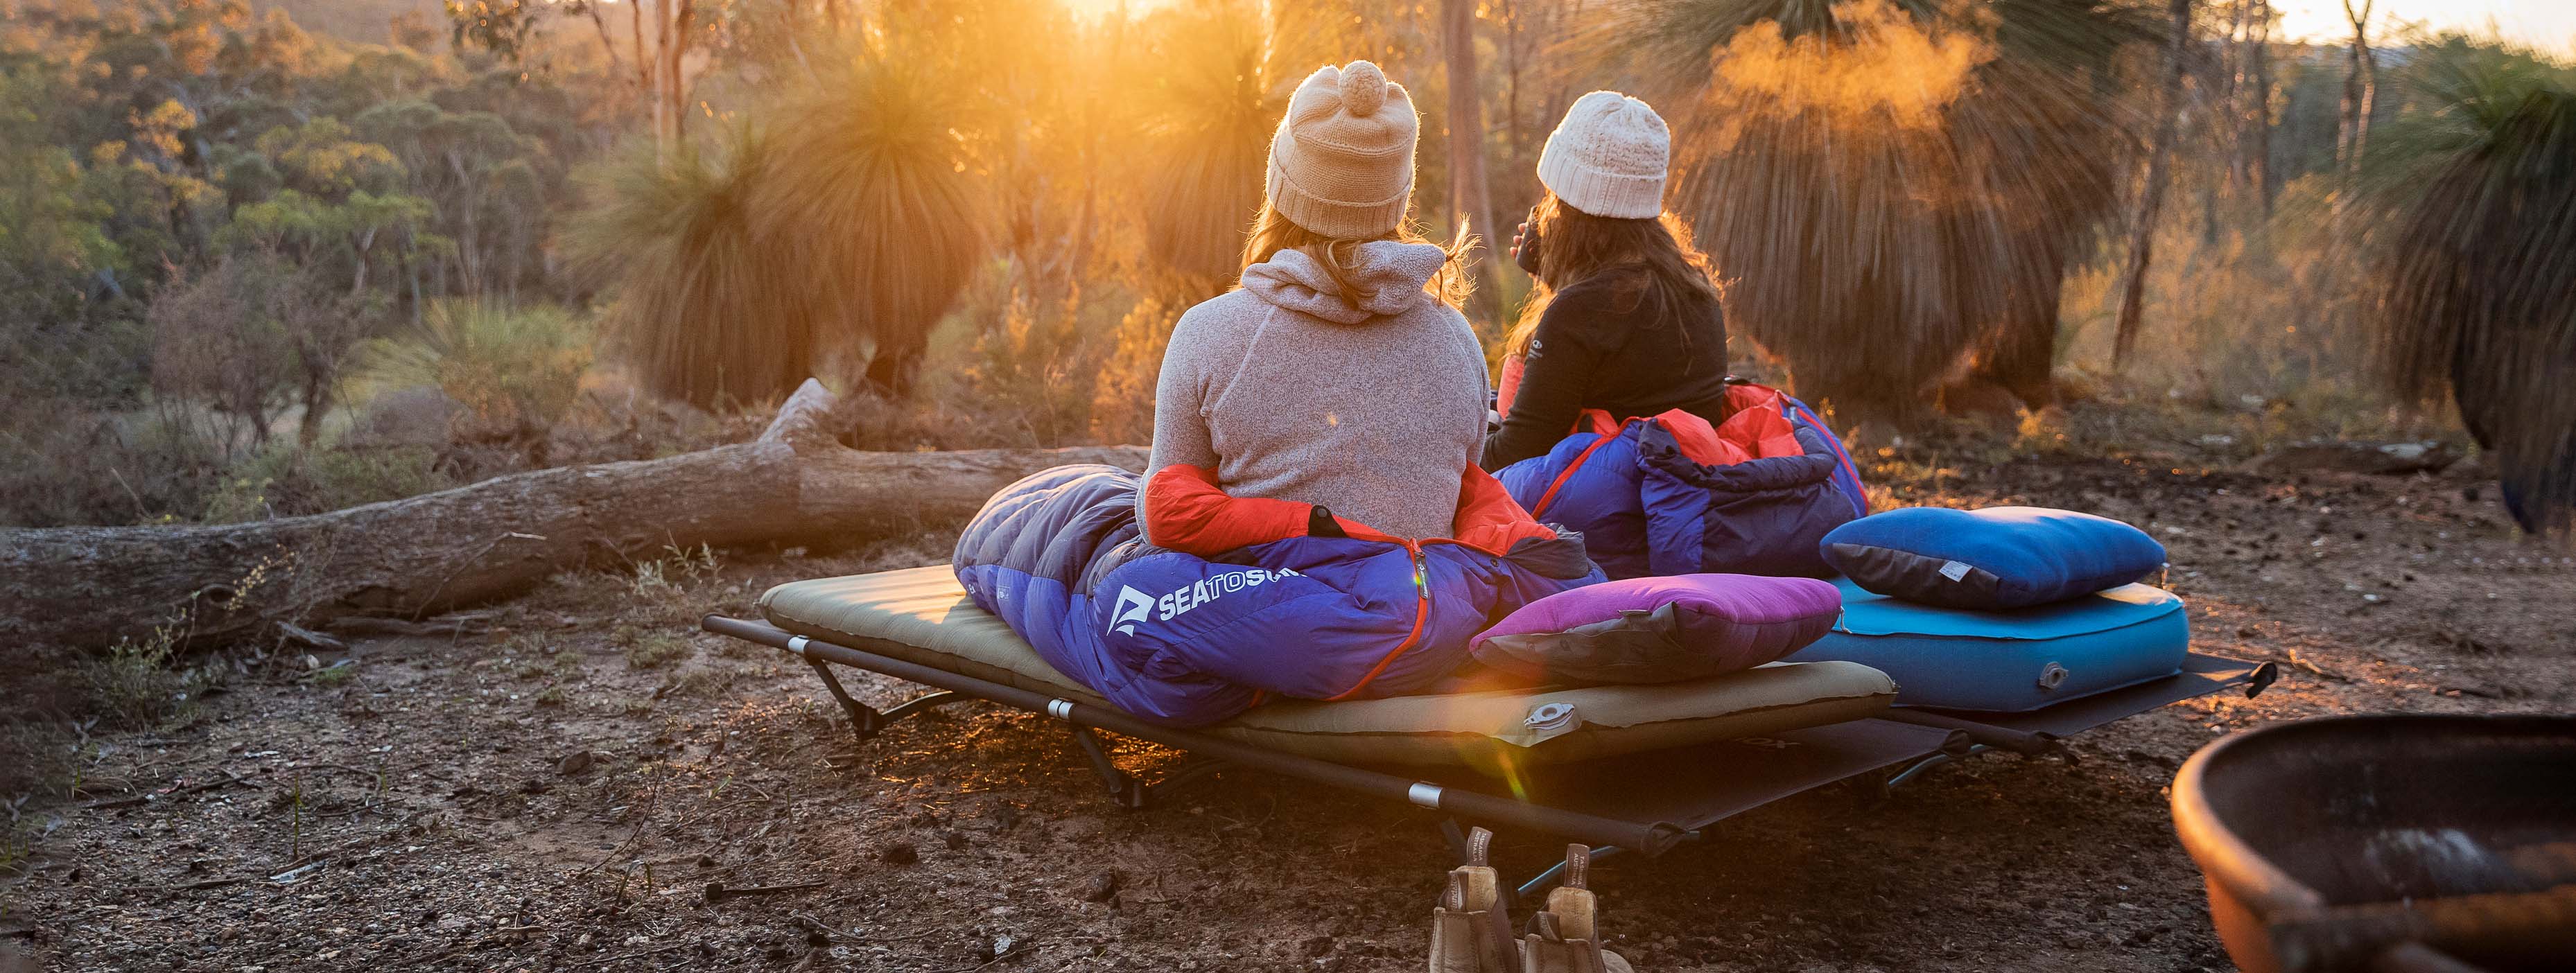 Gift Guide | Camping Gift Guide